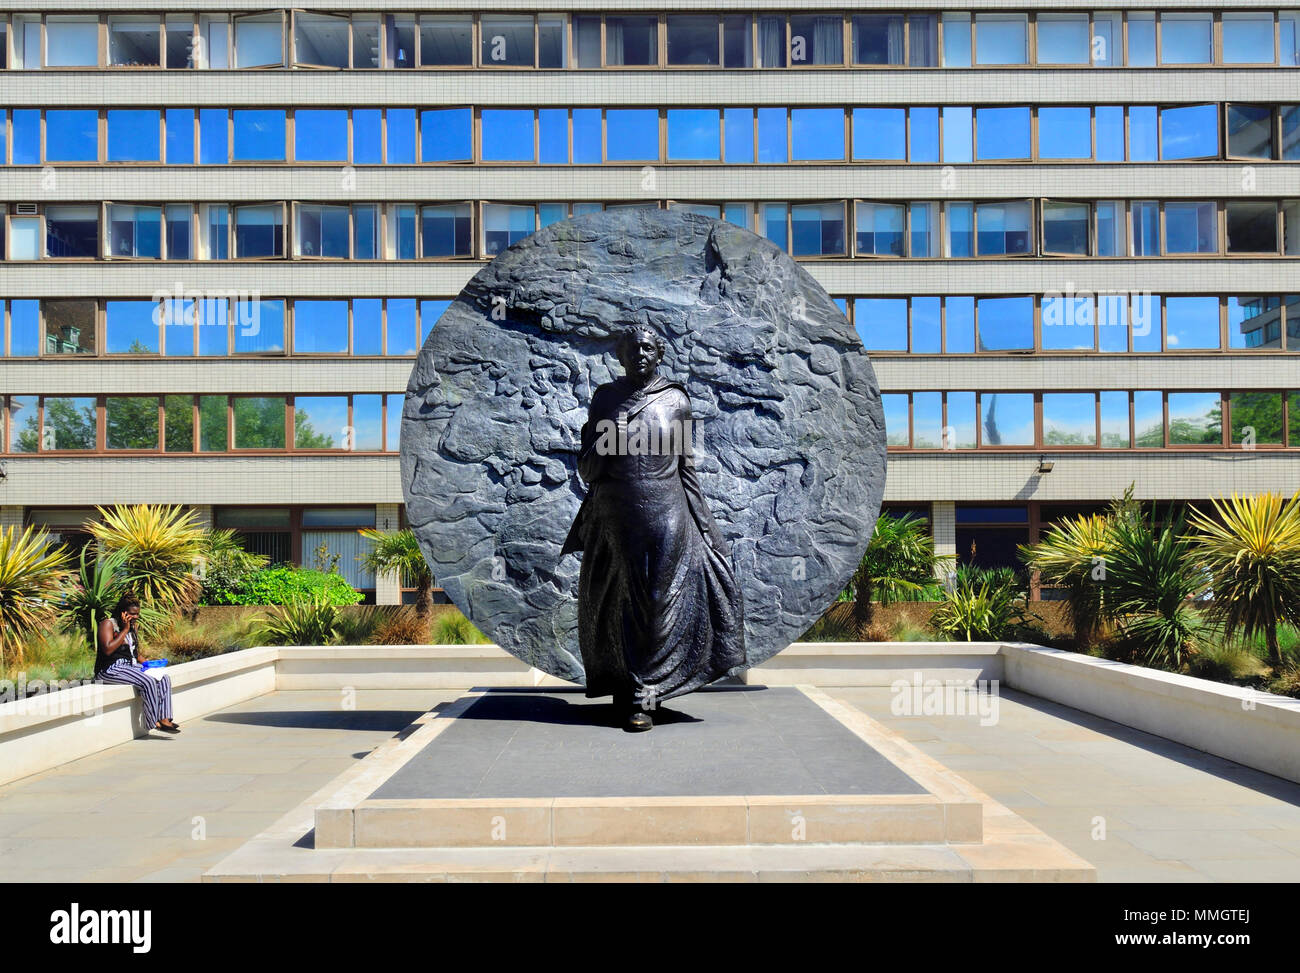 London,England, UK. Memorial to Mary Seacole (Jamaican-born nurse: 1805-1881) in the grounds of St Thomas' Hospital. By Martin Jennings, 2016. Stock Photo